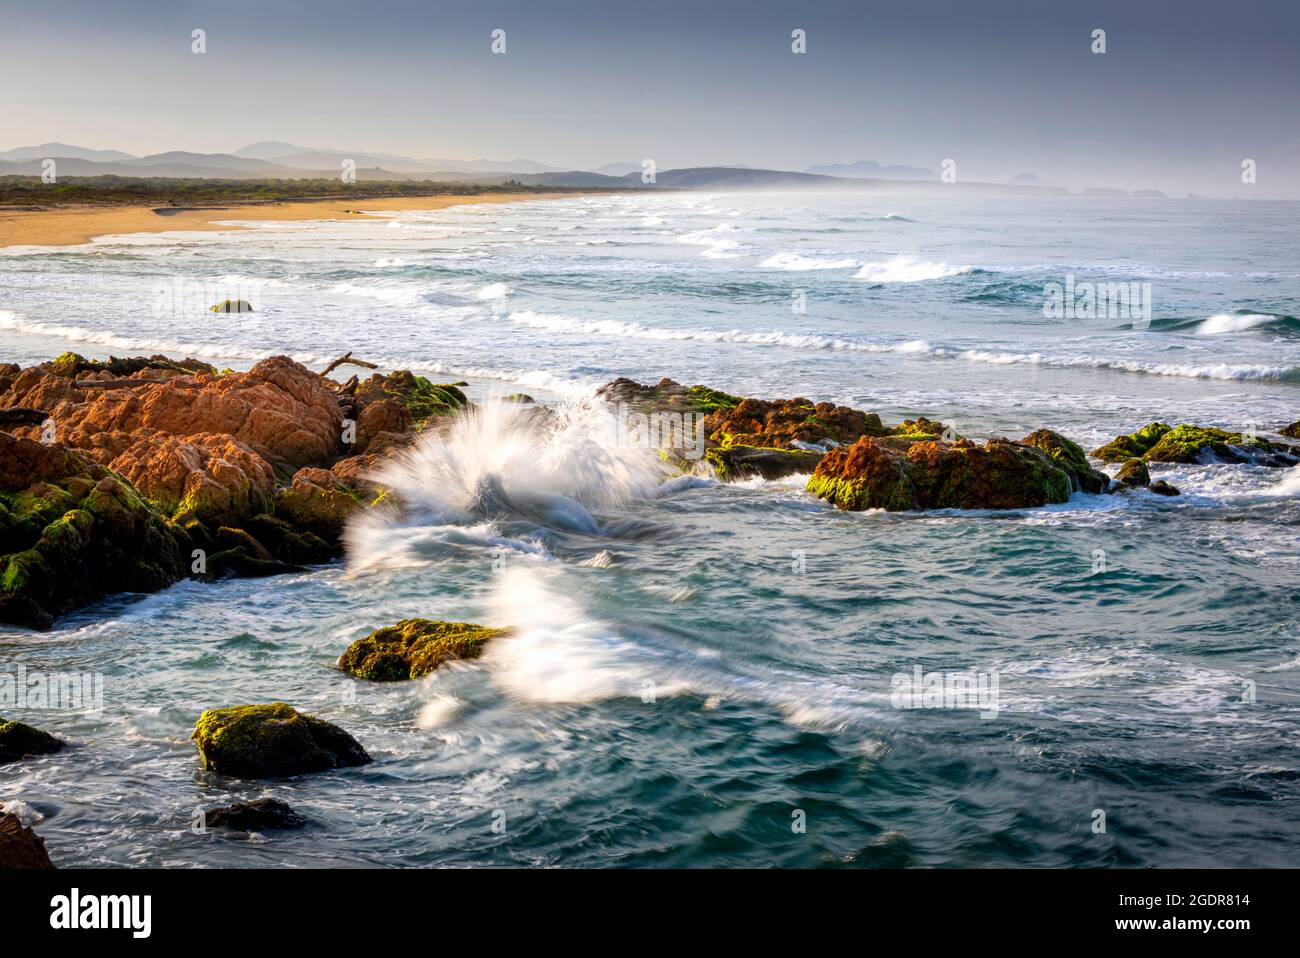 Waves crash on rocks looking north on the Pacific Coast at Chalacatepec Beach in Jalisco, Mexico. Stock Photo